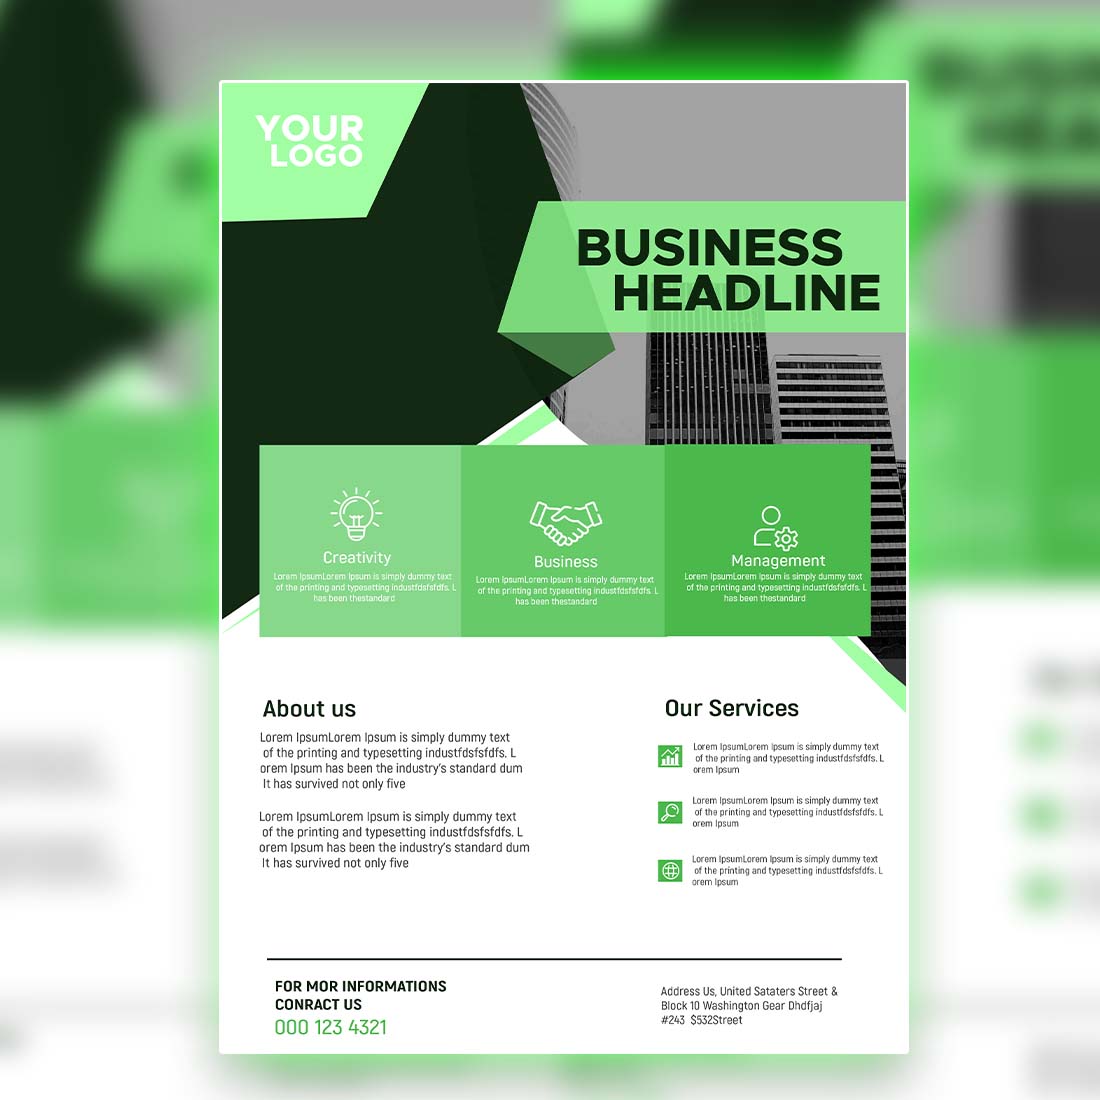 Professional Flyer DESIGN For Your Business cover image.